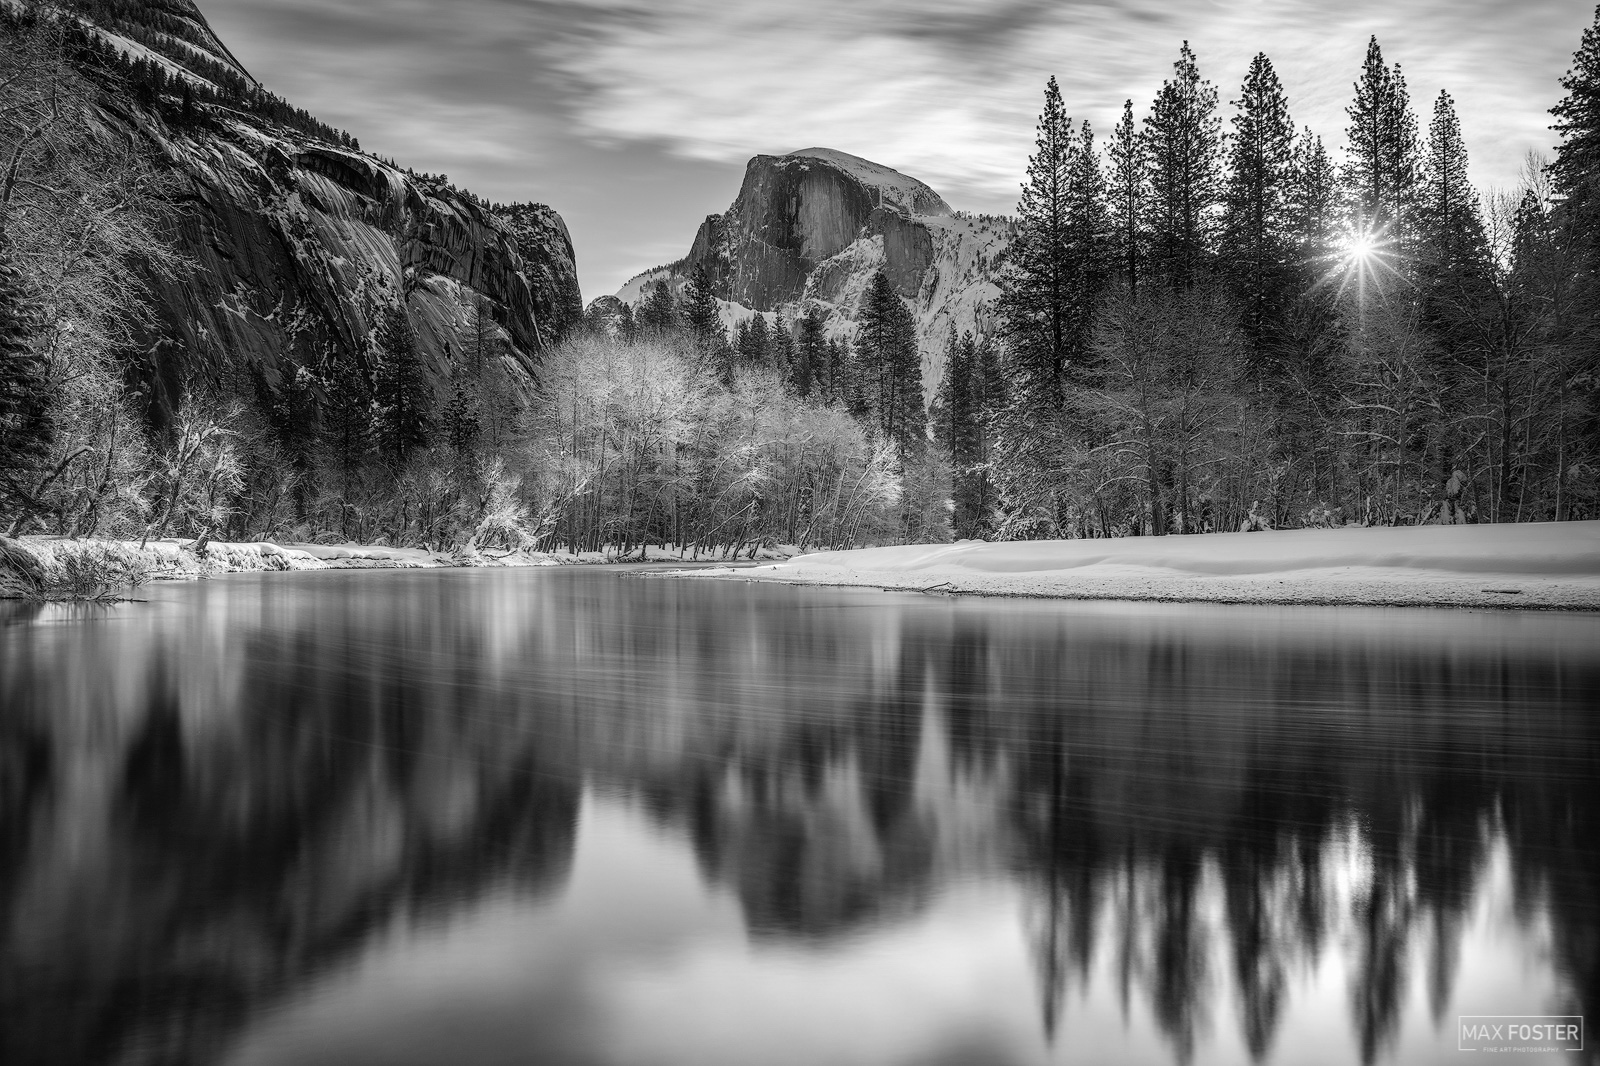 Elevate your space with Winter Solstice Monochrome, Max Foster's limited edition photography print of Half Dome in Yosemite National...